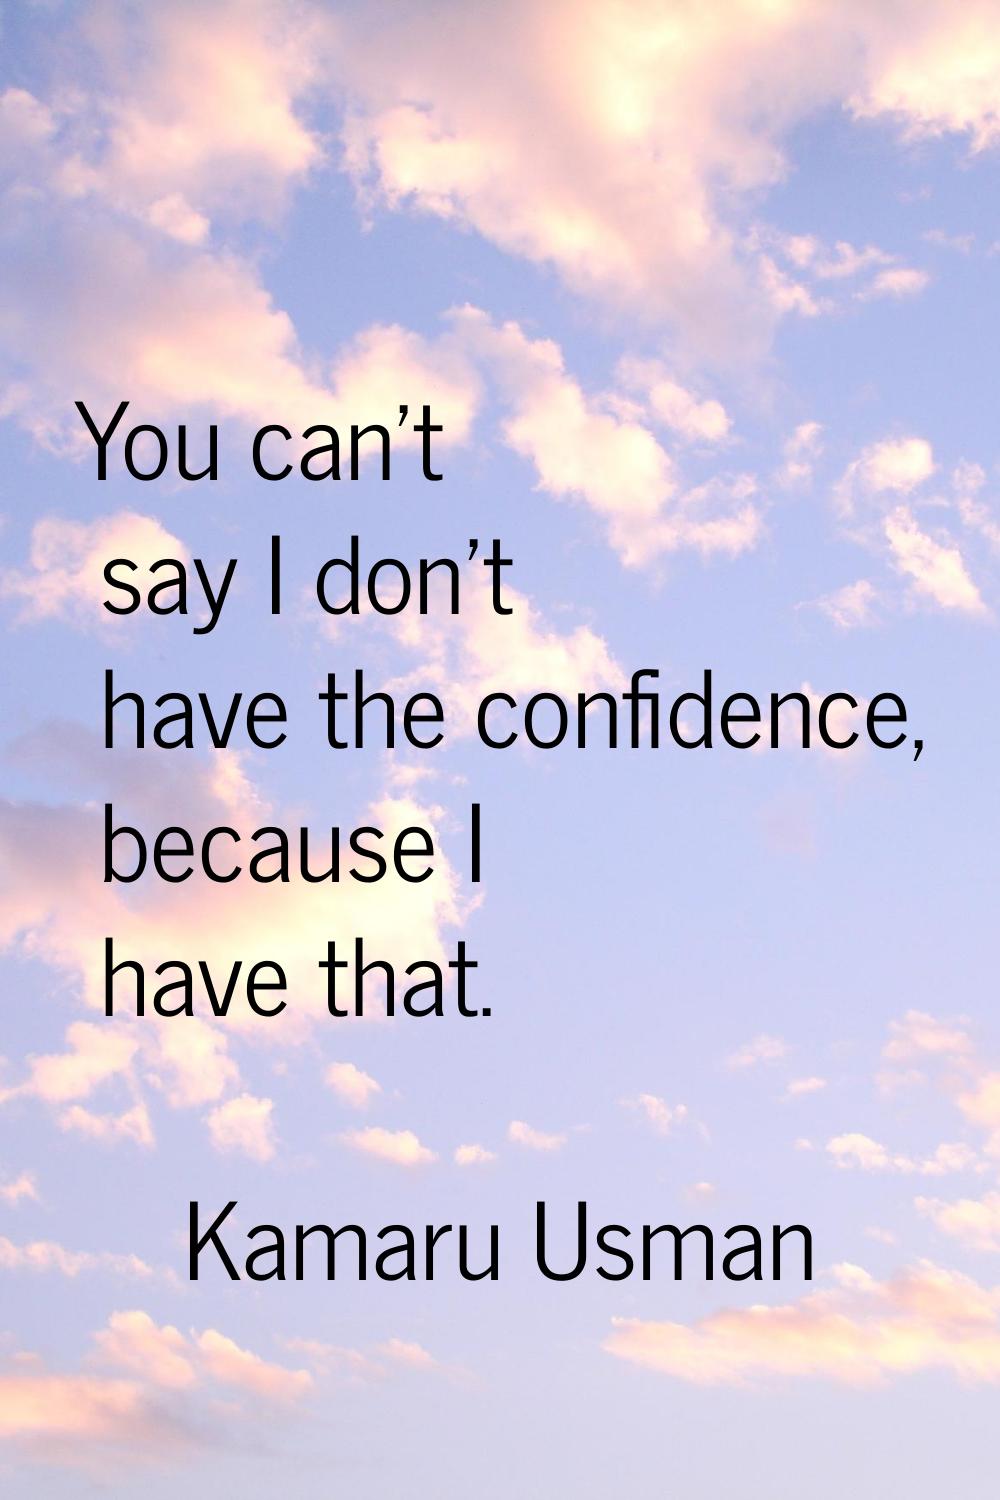 You can't say I don't have the confidence, because I have that.